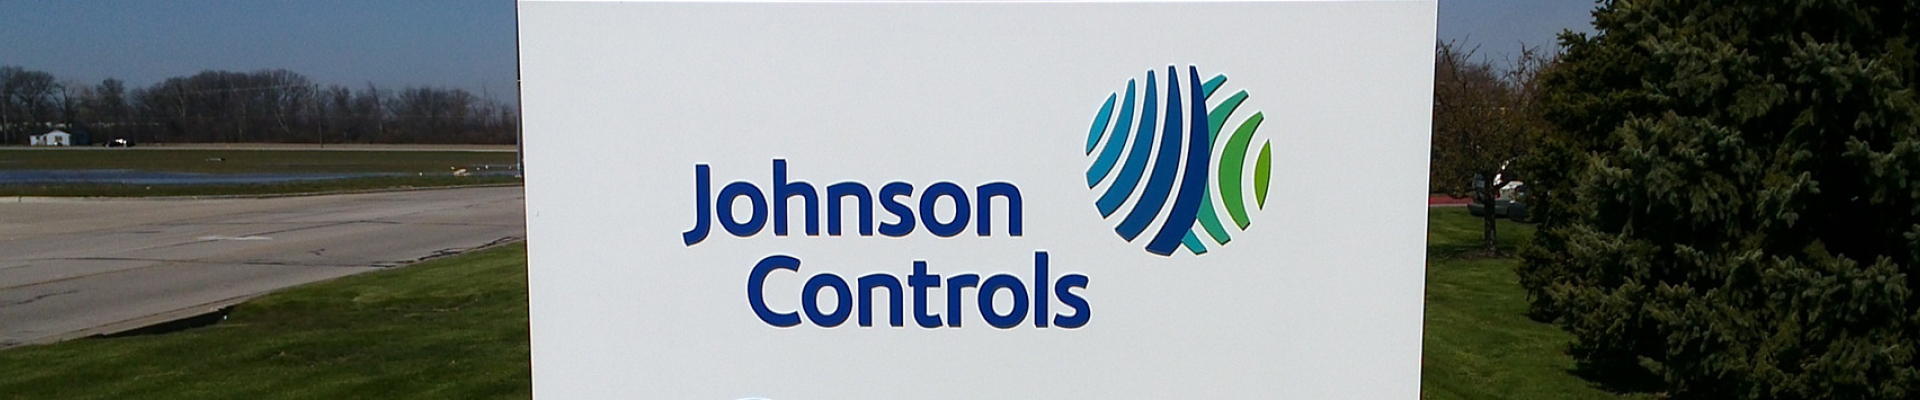 Brand identity and signage programme for Johnson Controls delivered by Pearce Signs.